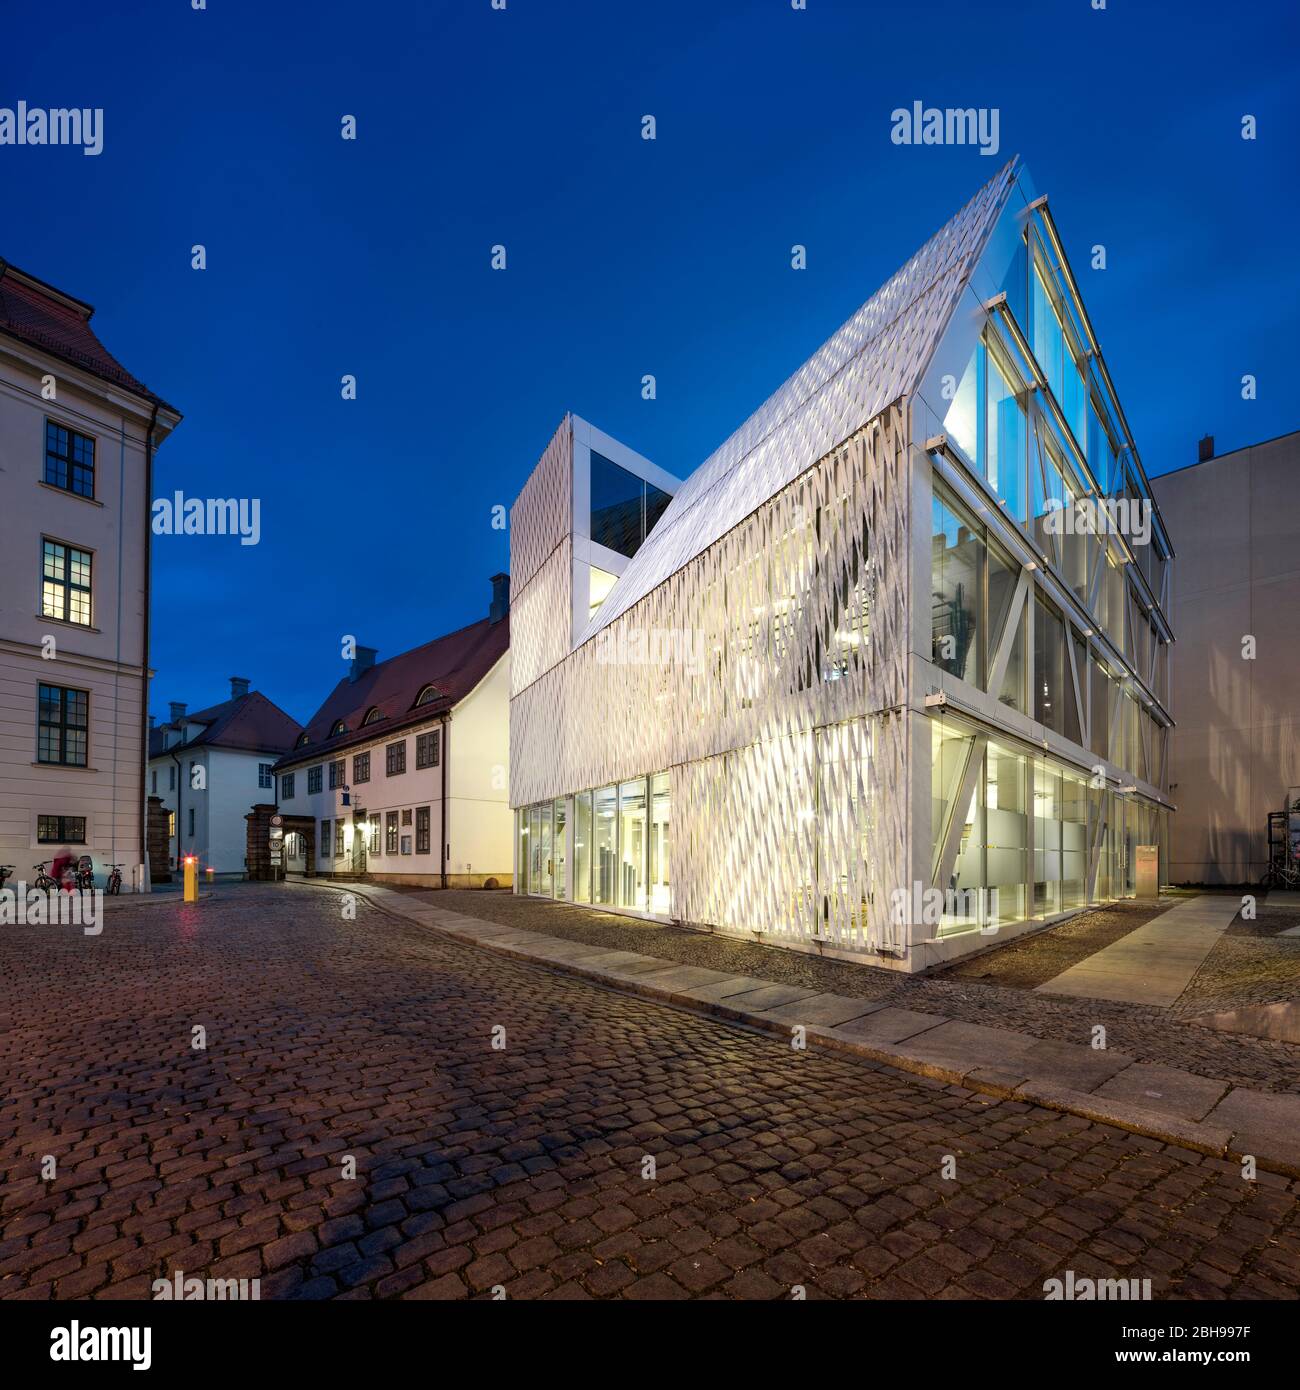 Illuminated Cultural Foundation of the Federal Government, at dusk, Halle an der Saale, Saxony-Anhalt, Germany Stock Photo